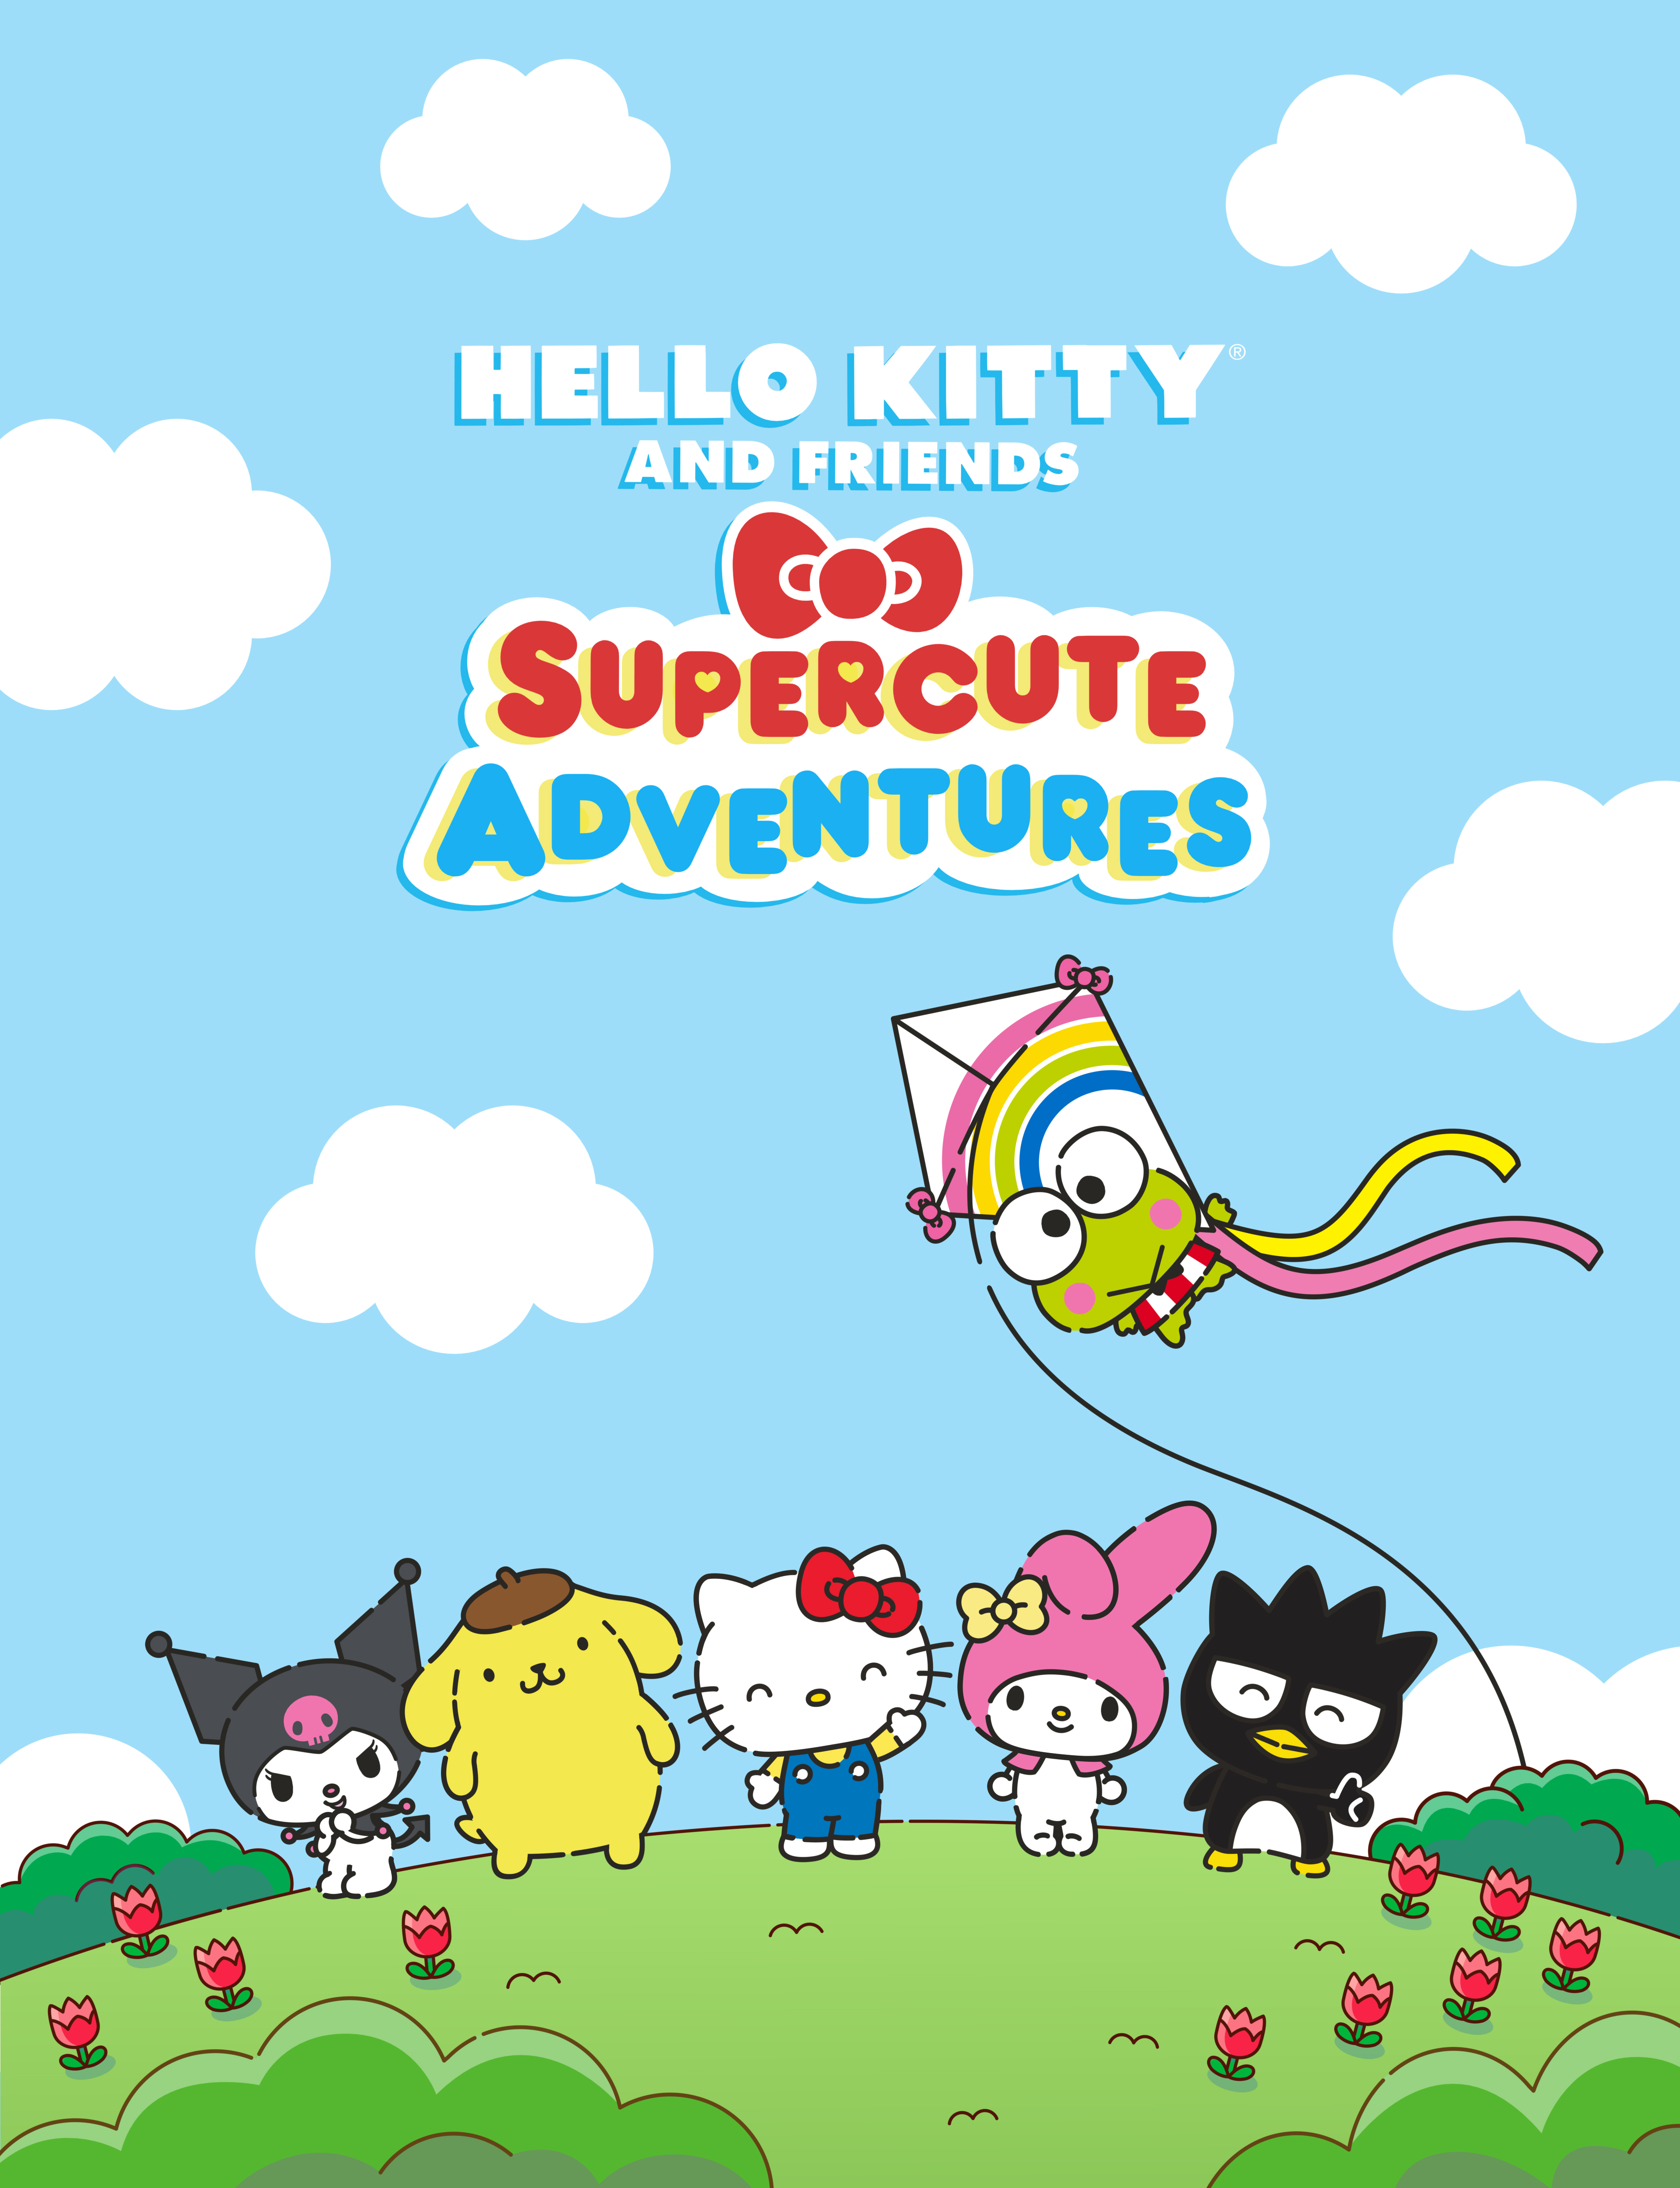 Sanrio® Debuts Hello Kitty® and Friends Supercute Adventures Animated  Series on YouTube in Celebration of Company's 60th Anniversary